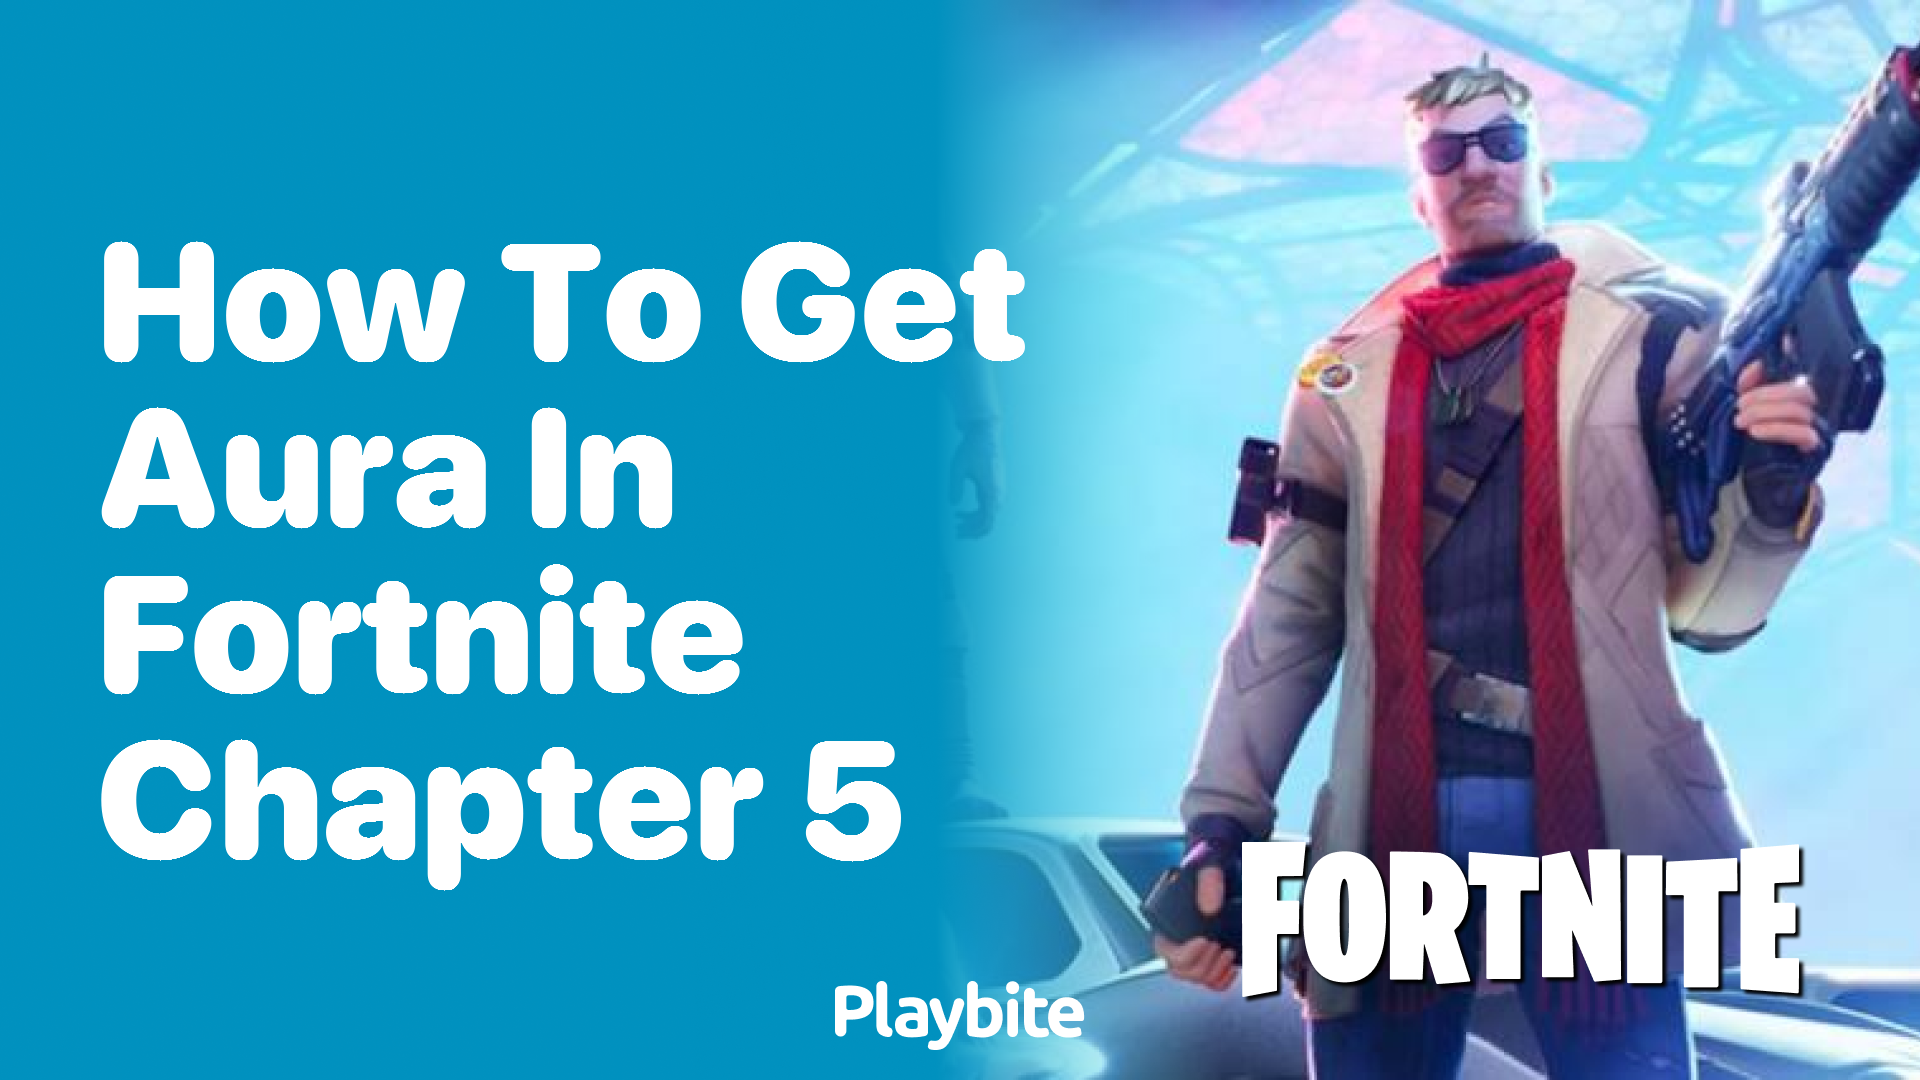 How to Get Aura in Fortnite Chapter 5